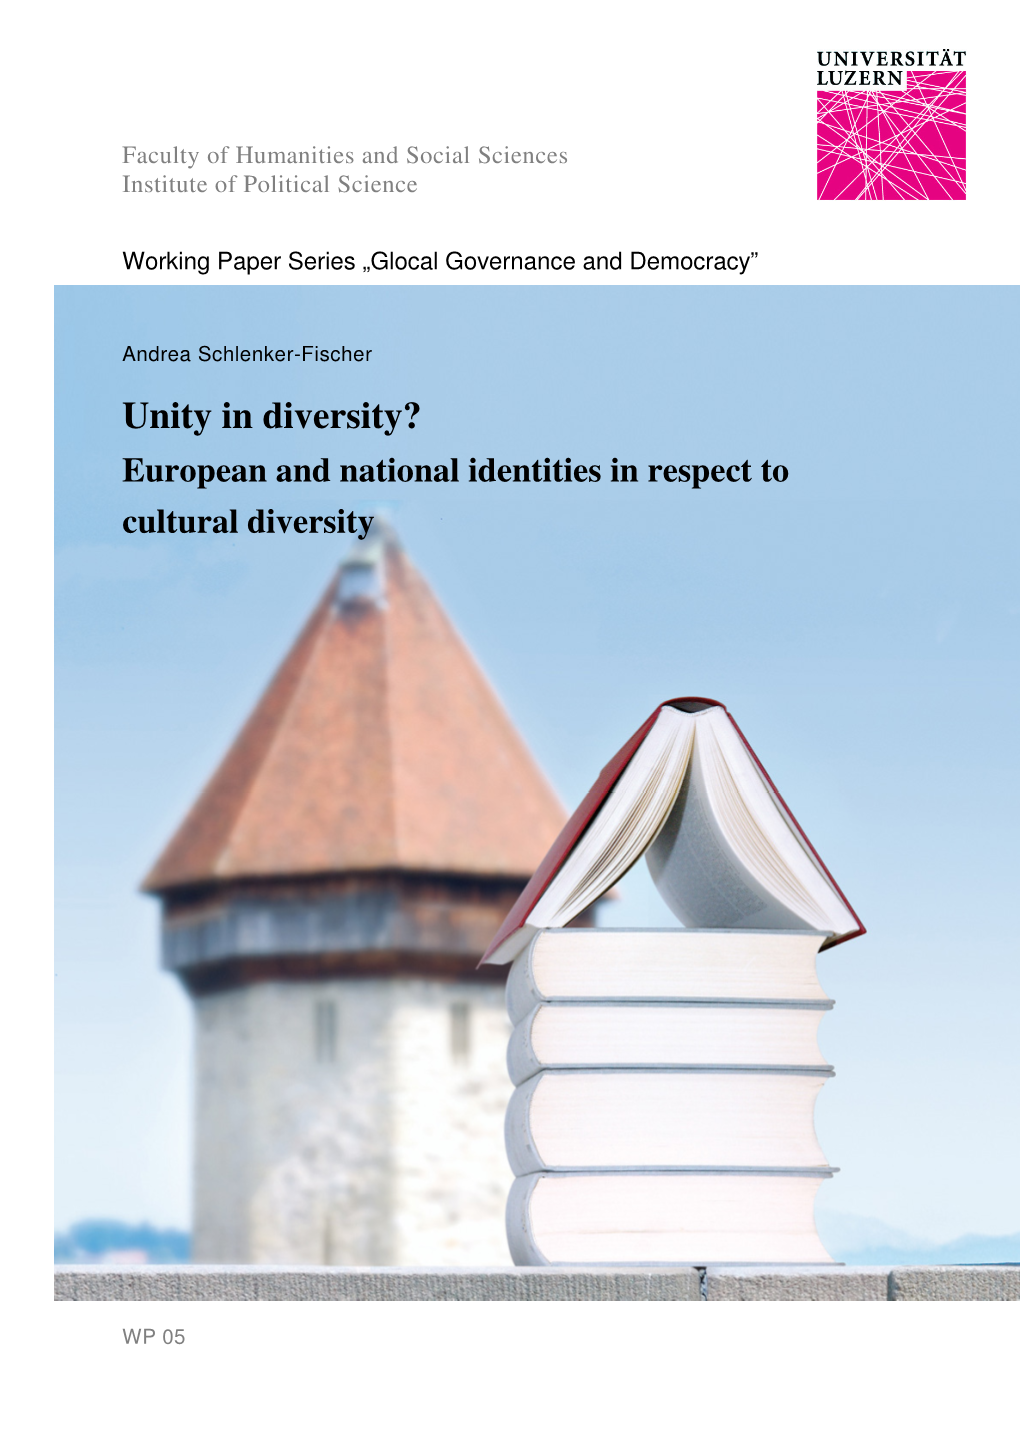 Unity in Diversity? European and National Identities in Respect to Cultural Diversity